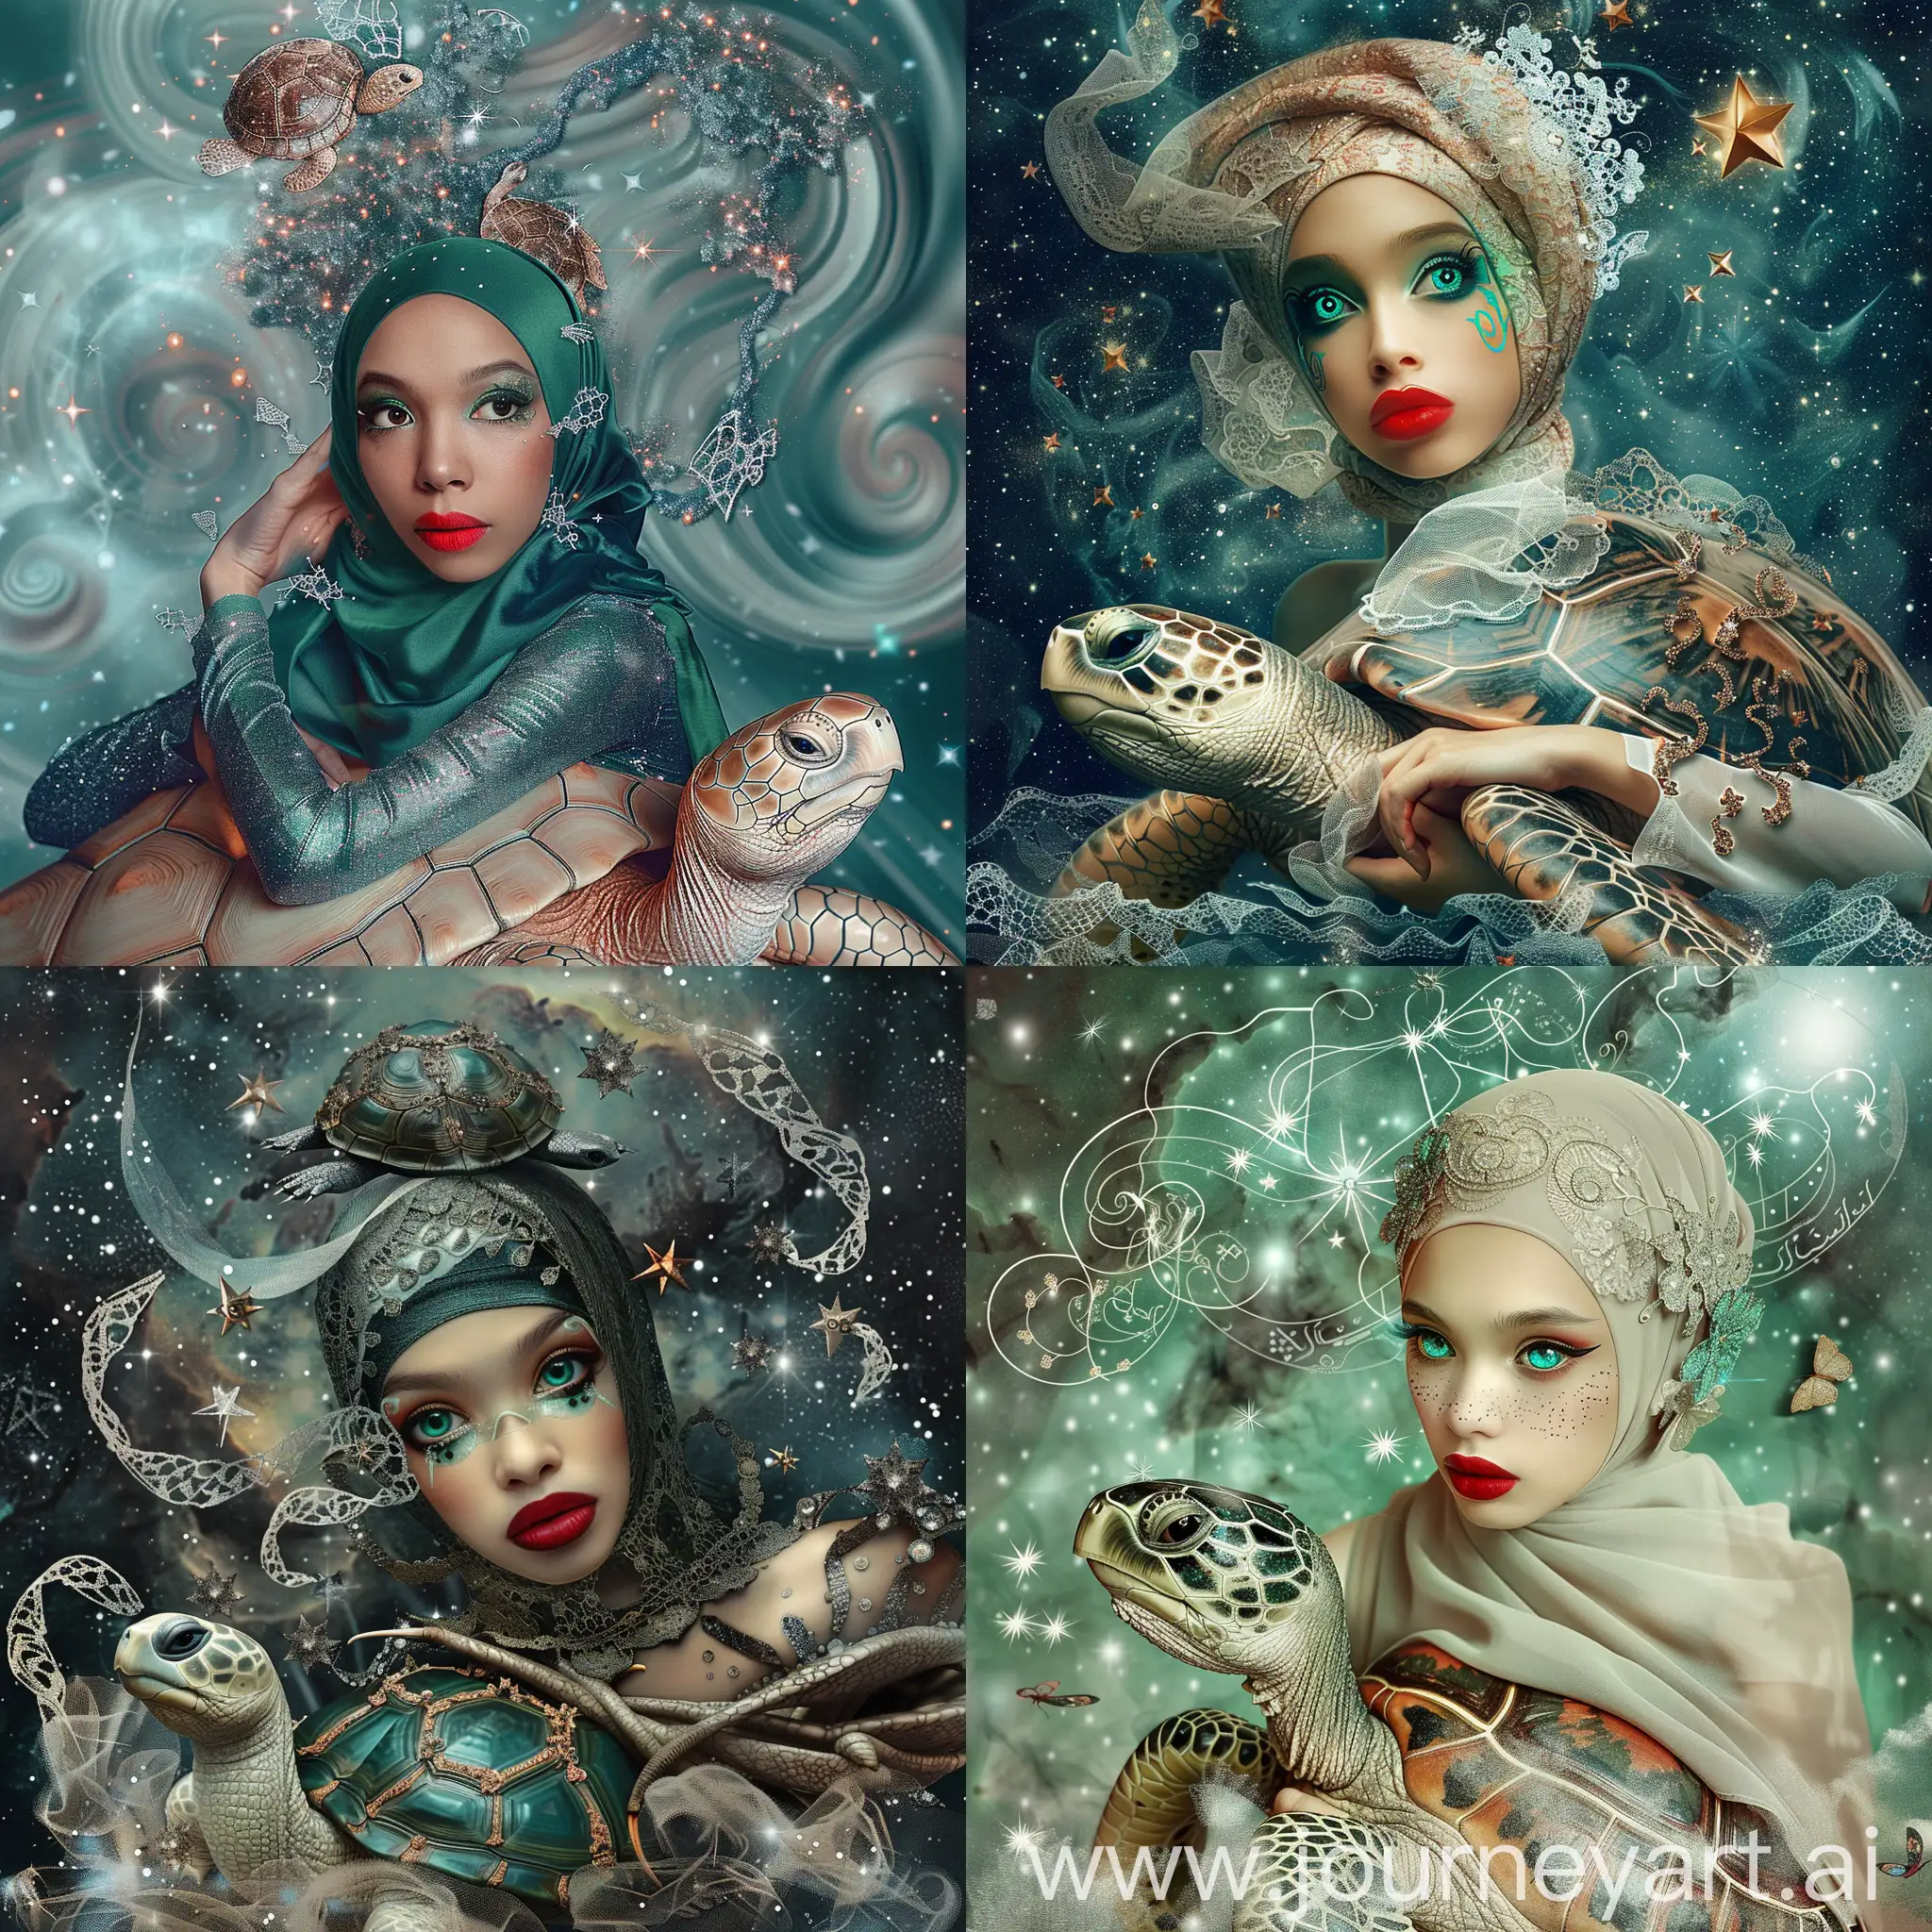 Surreal-Portrait-of-a-Beautiful-Muslimah-on-Mythical-Turtle-in-Galactic-Landscape